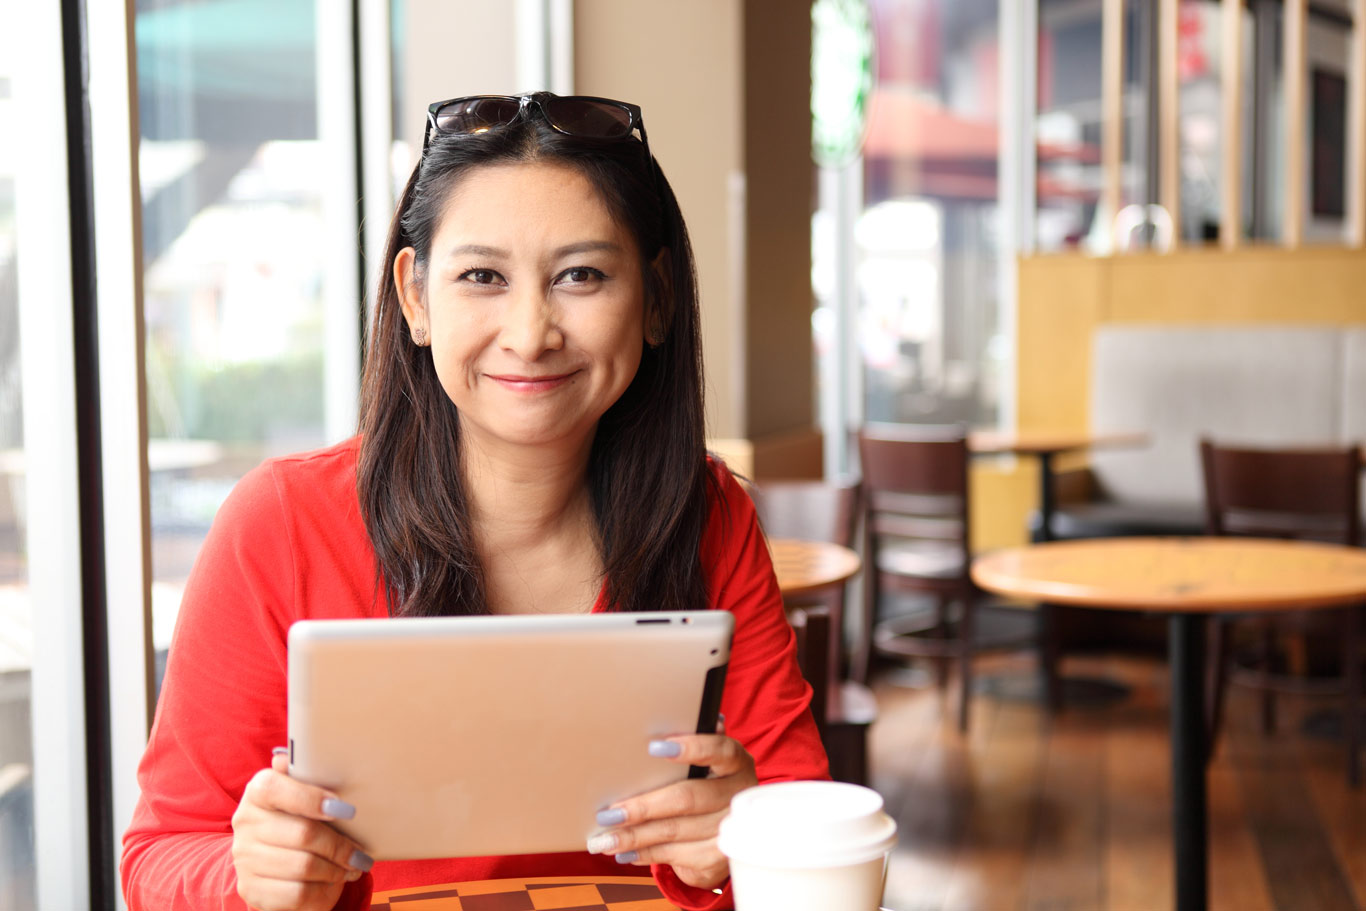 woman-in-red-shirt-holding-ipad